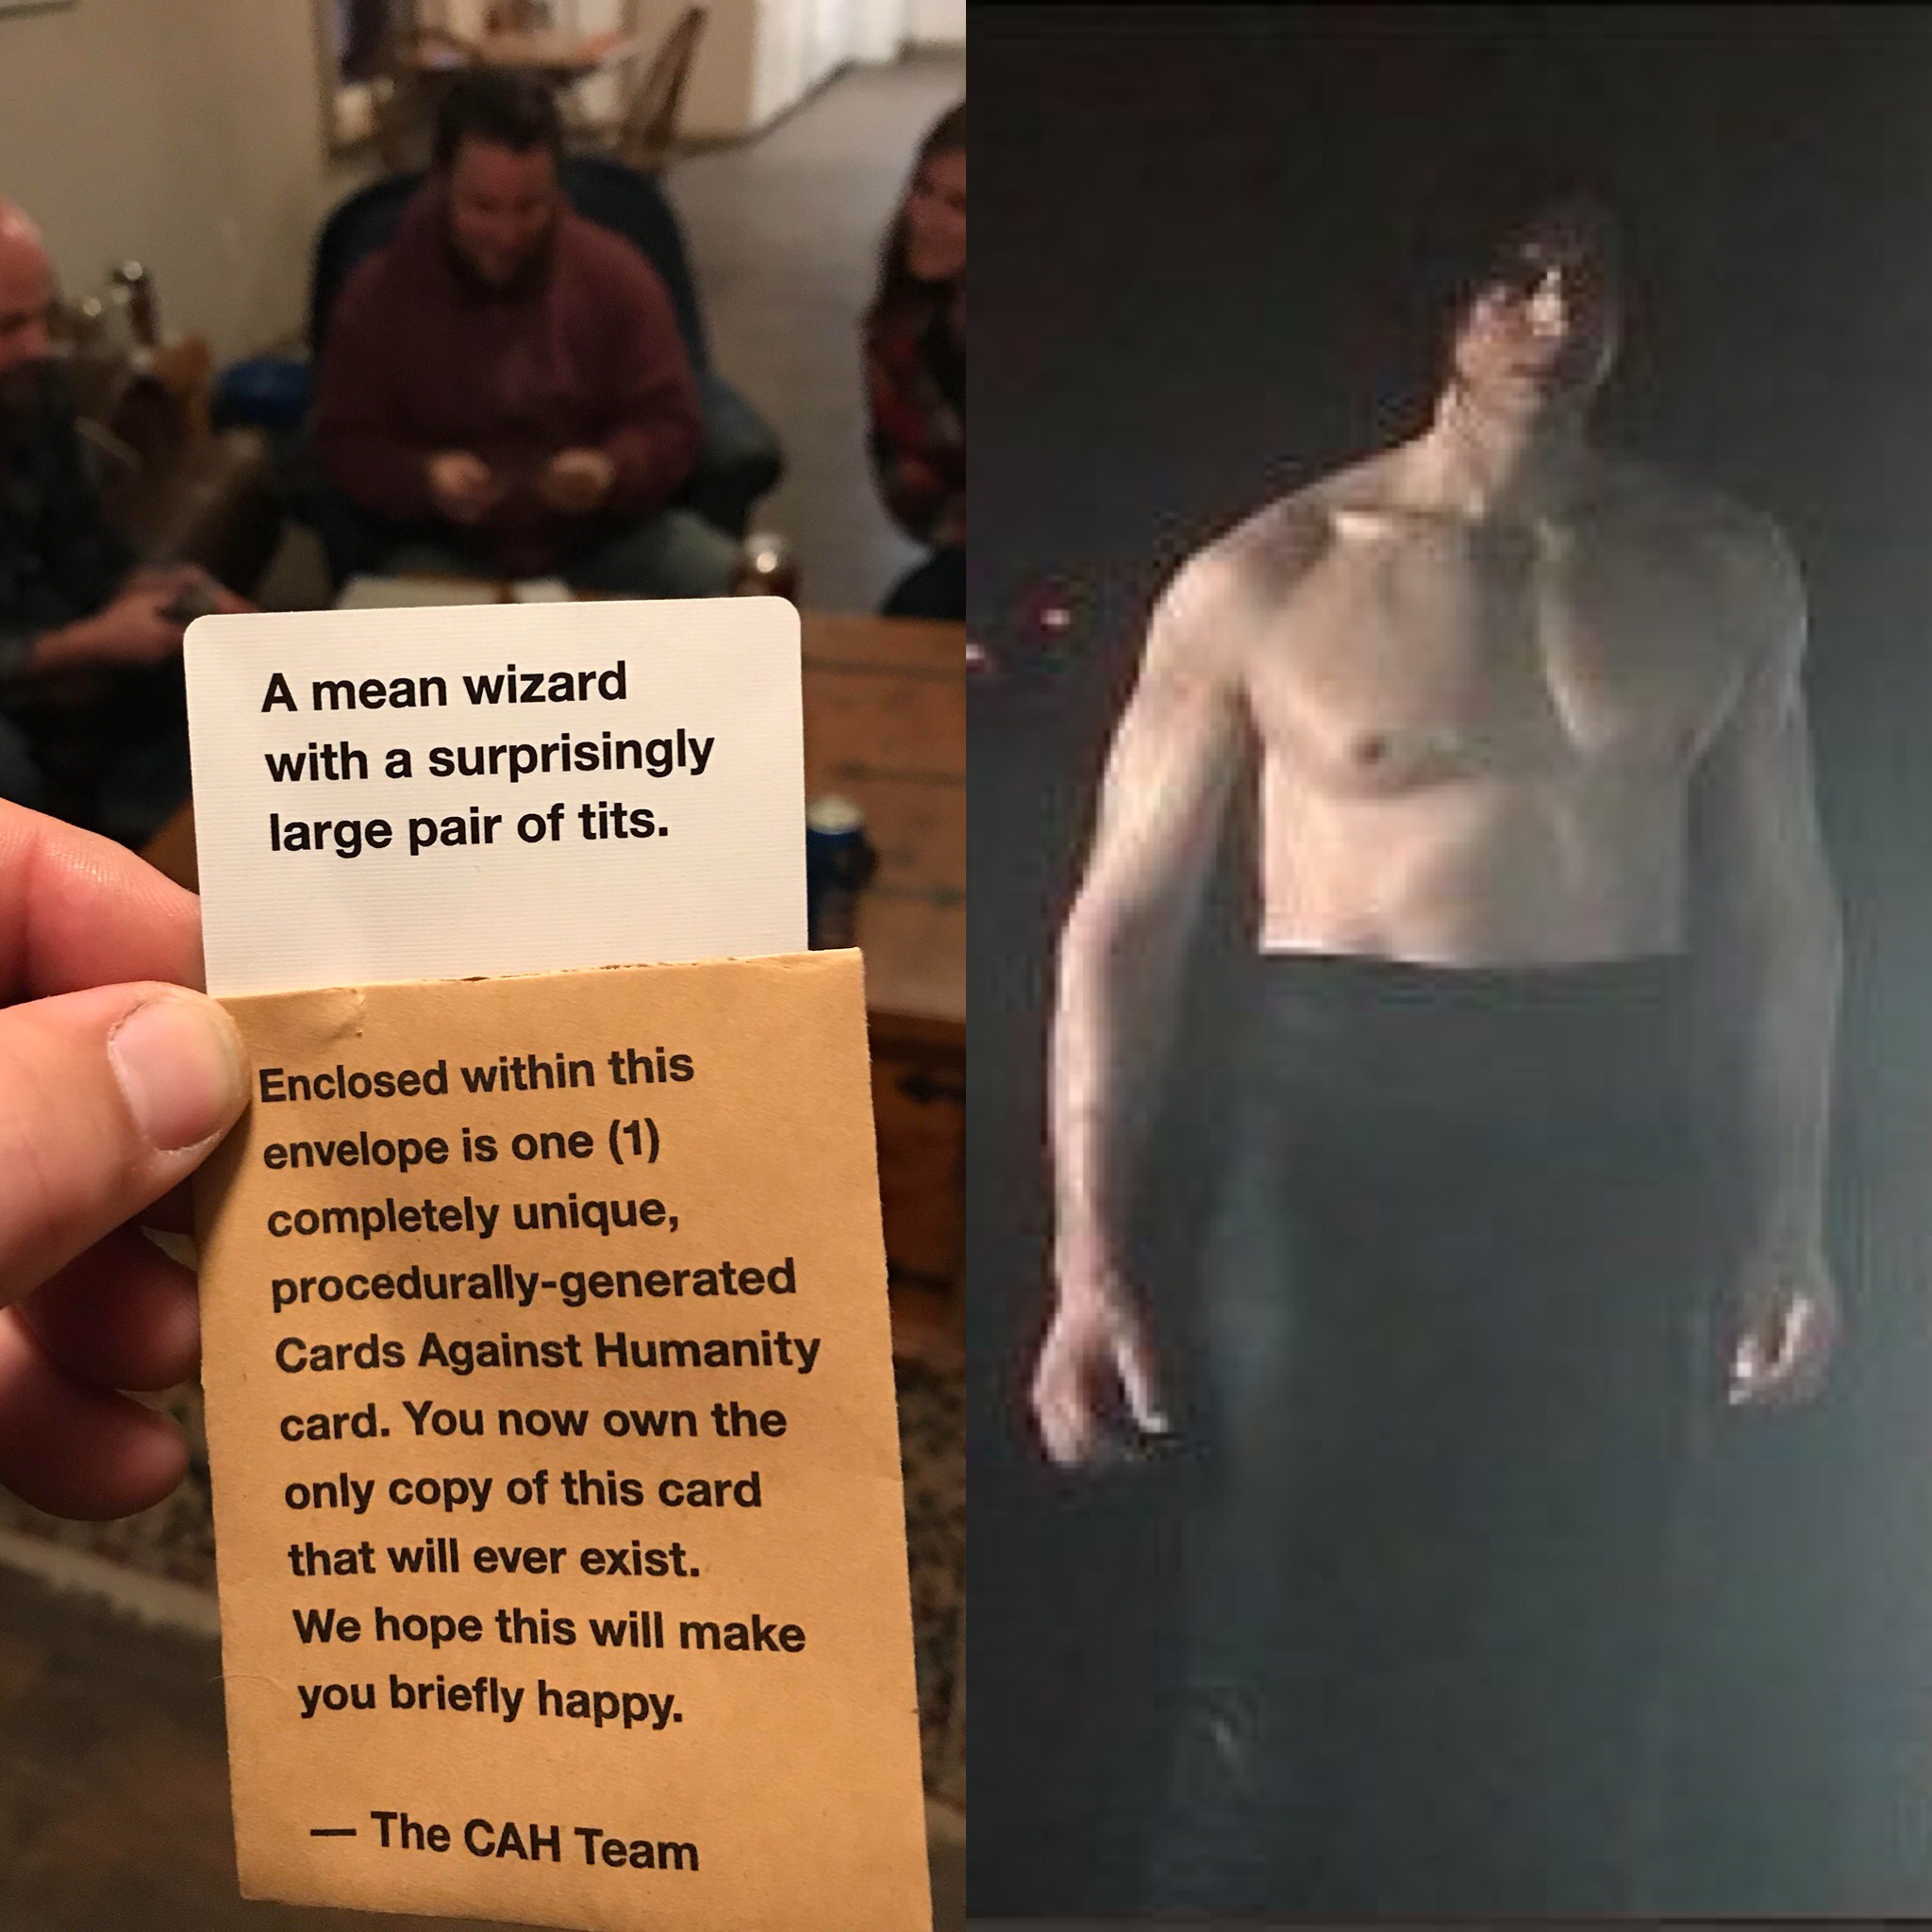 random pic A mean wizard with a surprisingly large pair of tits. Enclosed within this envelope is one 1 completely unique, procedurallygenerated Cards Against Humanity card. You now own the only copy of this card that will ever exist. We hope this will ma